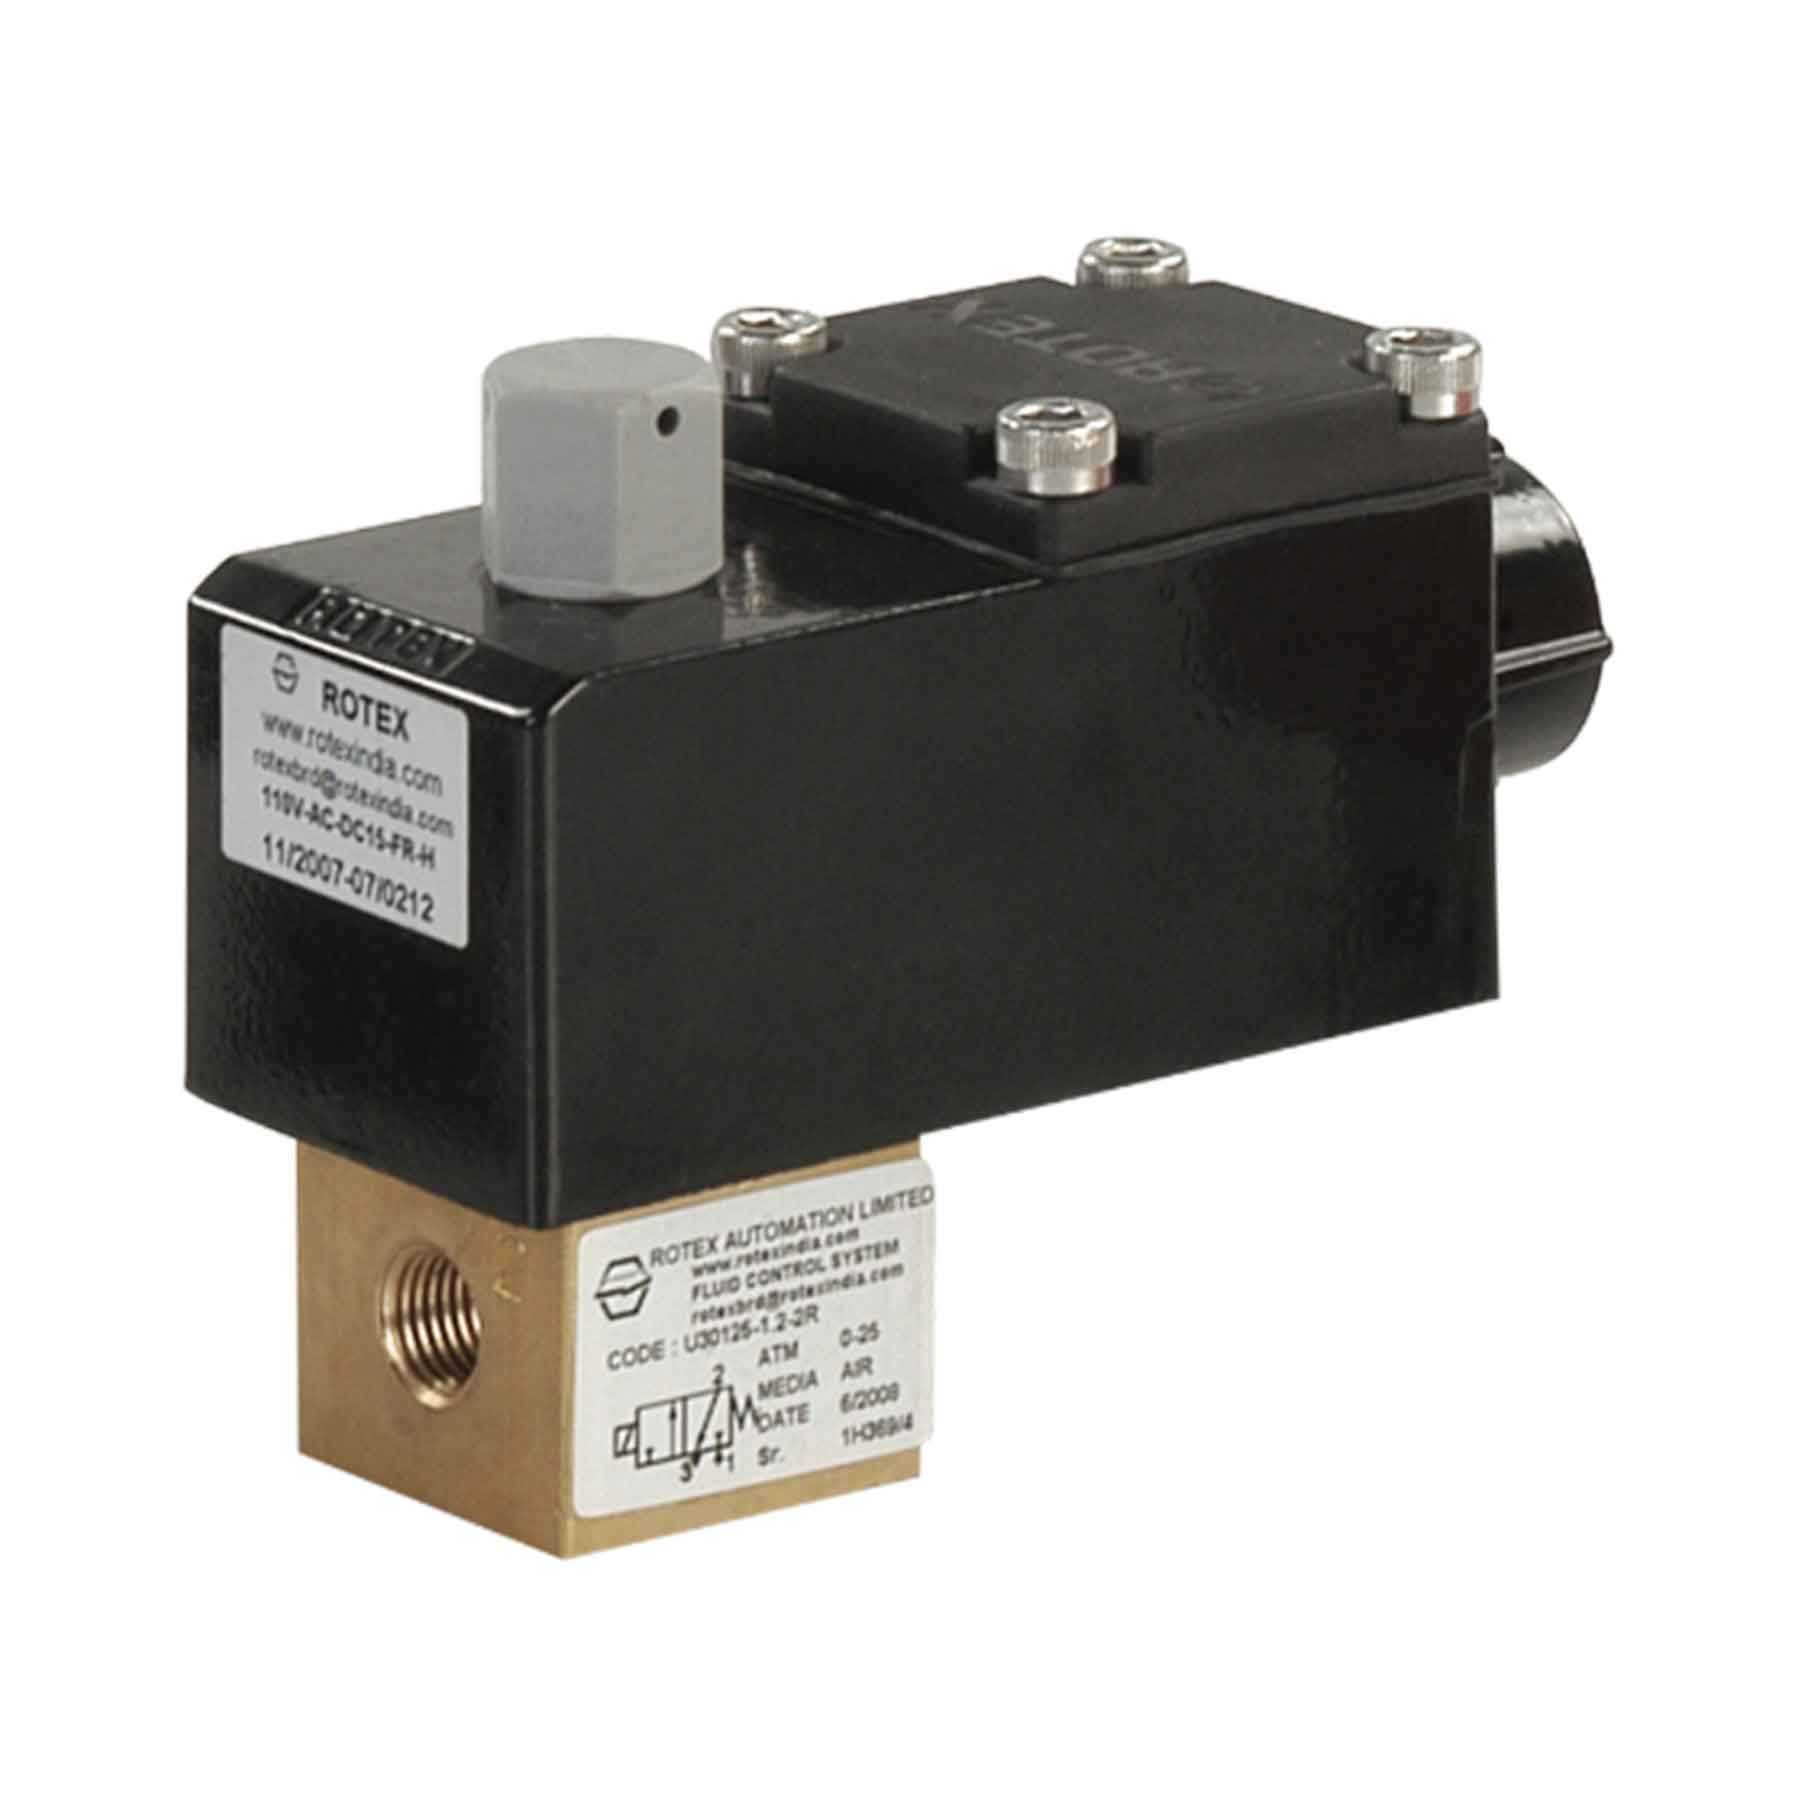 Rotex 2/2-Way Normally Closed Direct Lift Solenoid Valve 20101-3-2R-B2+III-24V-DC-66-NS-H-01